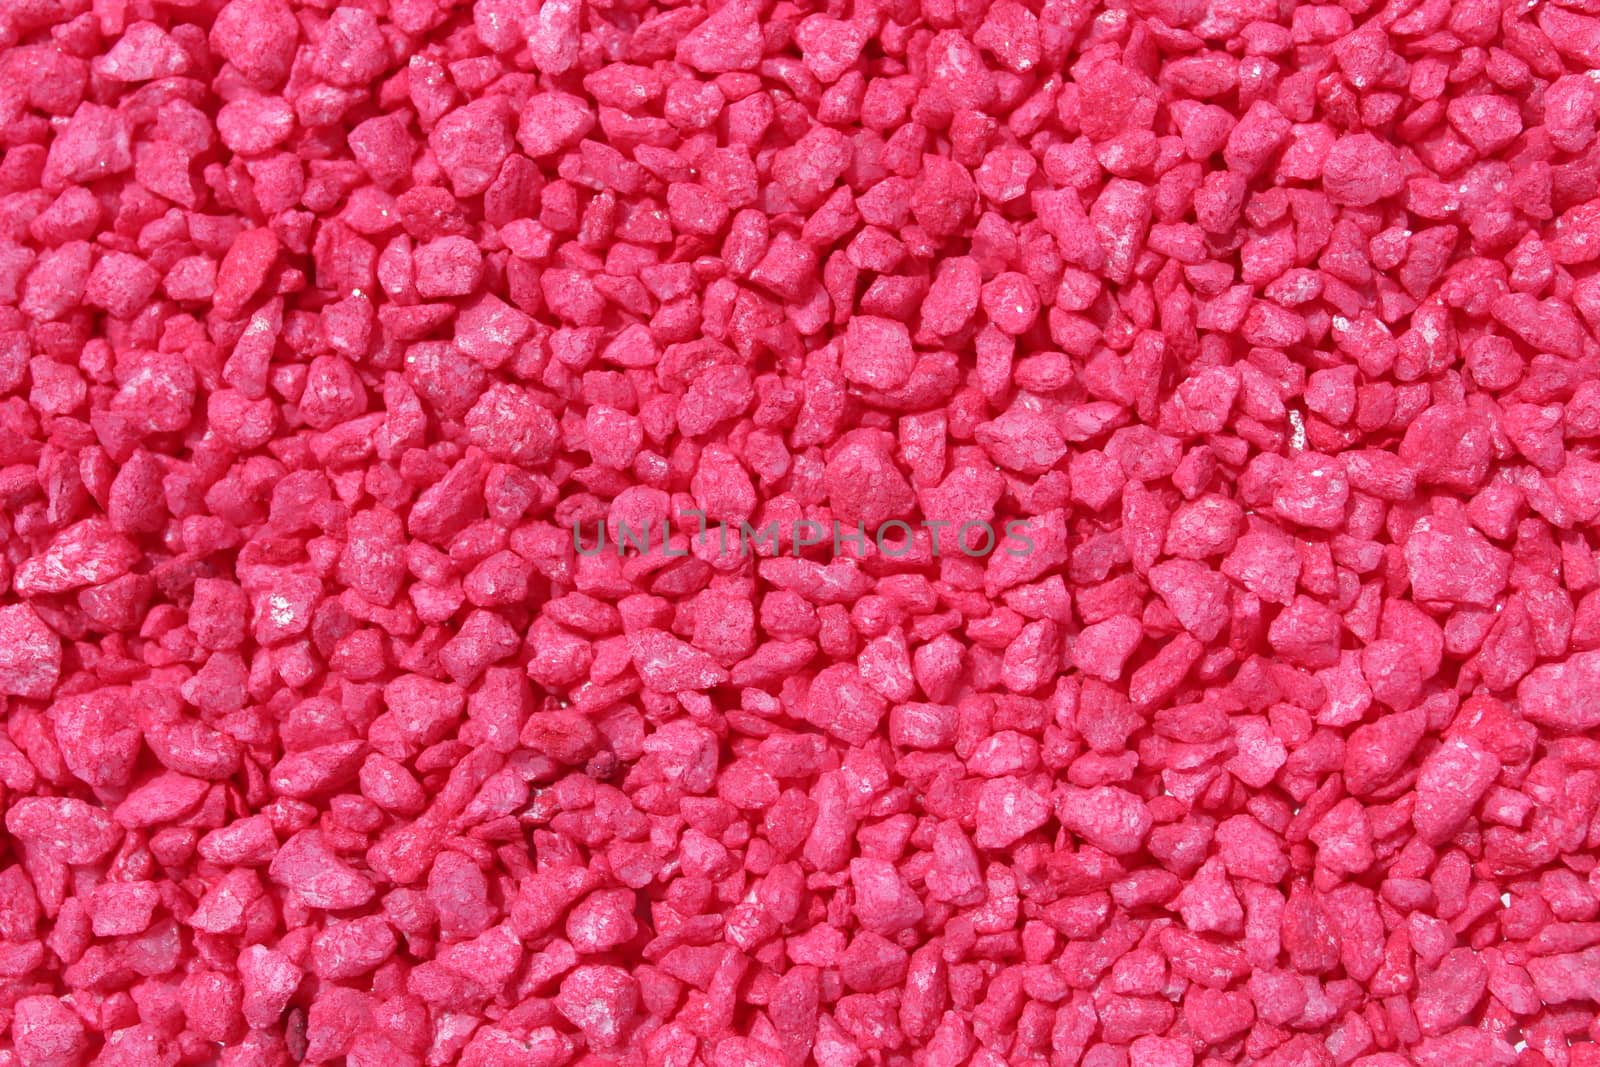 The picture shows a background with red decoration granules